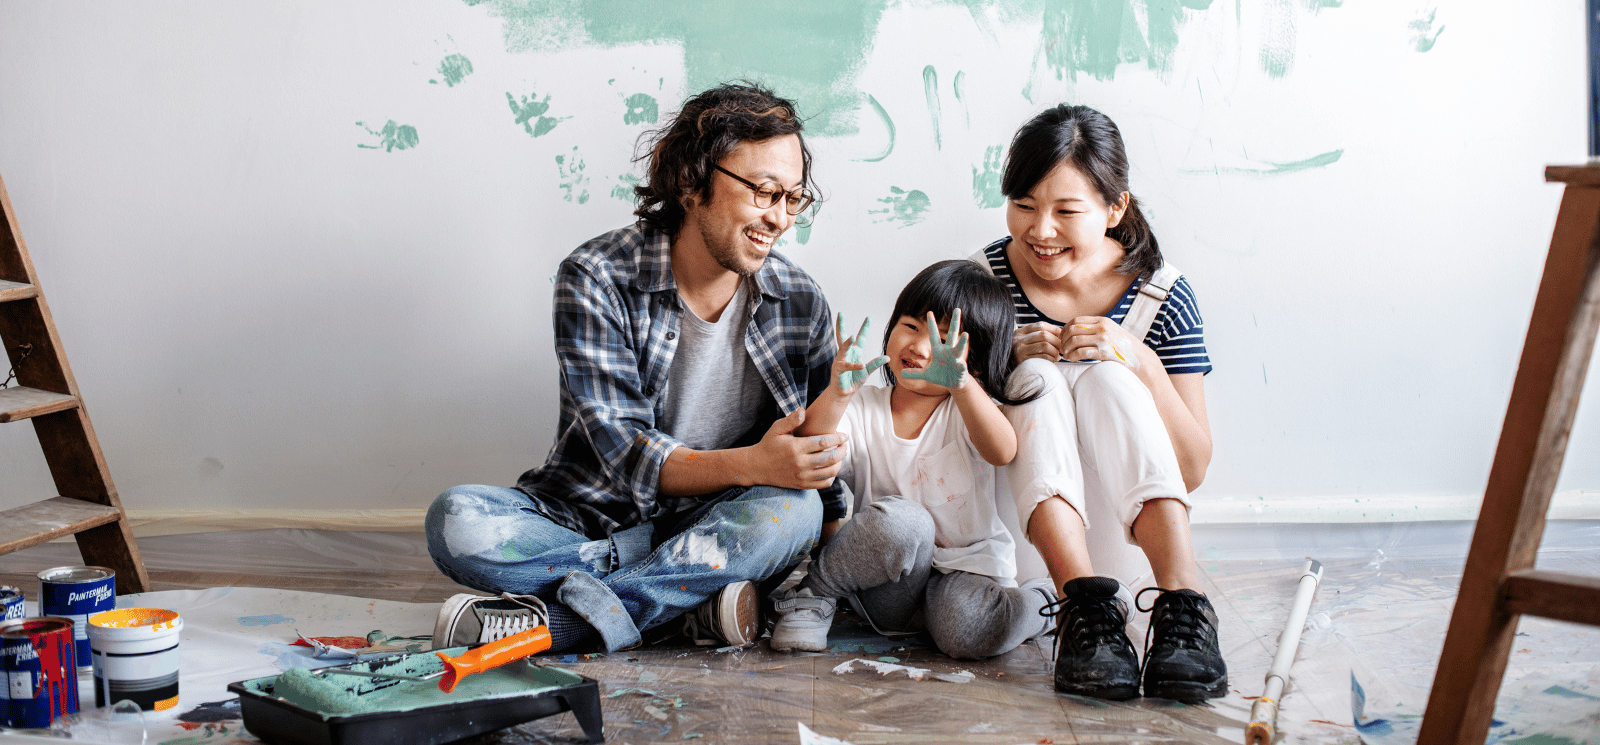 Family of three sitting on floor with paint.